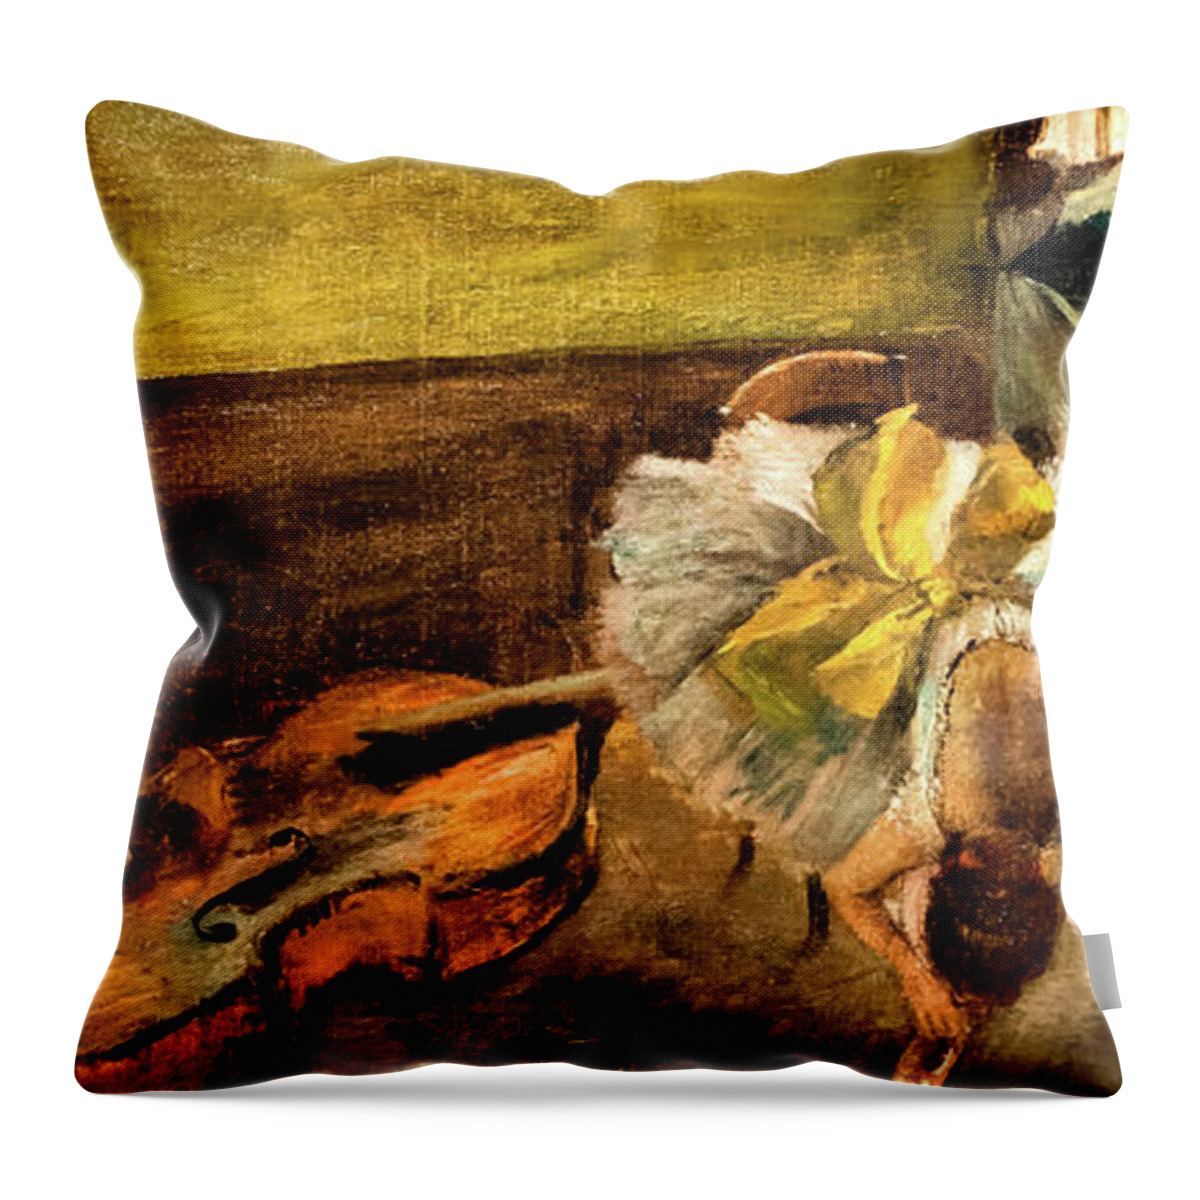 Edgar Degas Throw Pillow featuring the painting Dancers in the Rehersal Room with a Double Bass by Edgar Degas by Edgar Degas